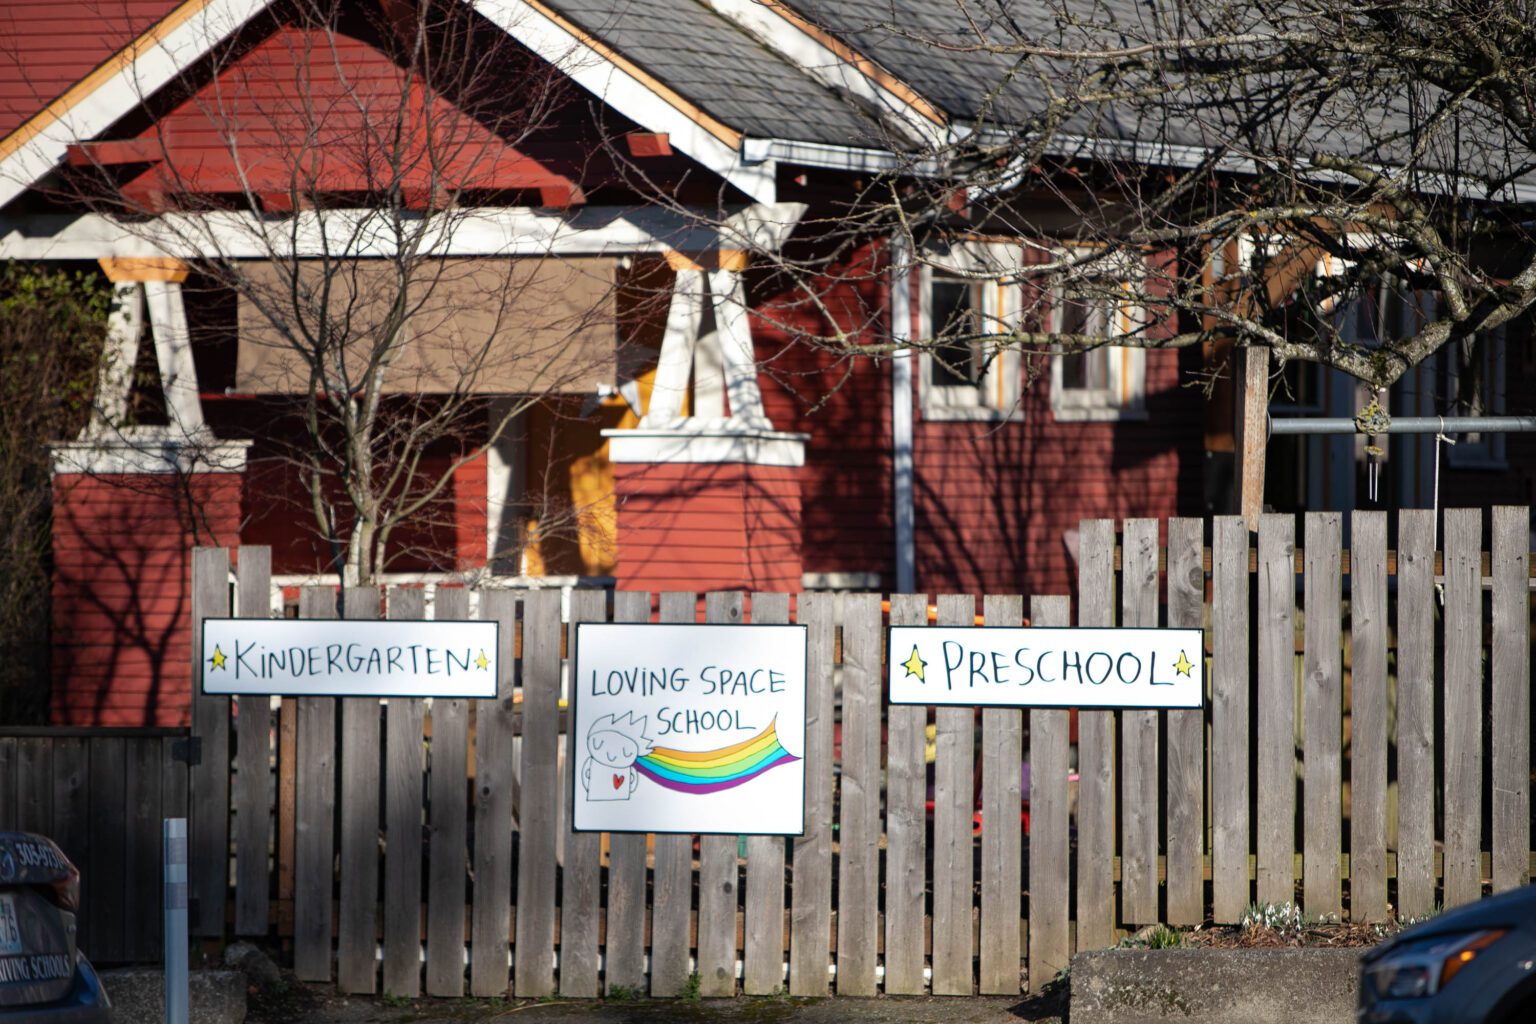 Loving Space School in Bellingham's York neighborhood offers preschool education. A property tax approved by voters last month will collect about $1.8 million more annually than originally expected